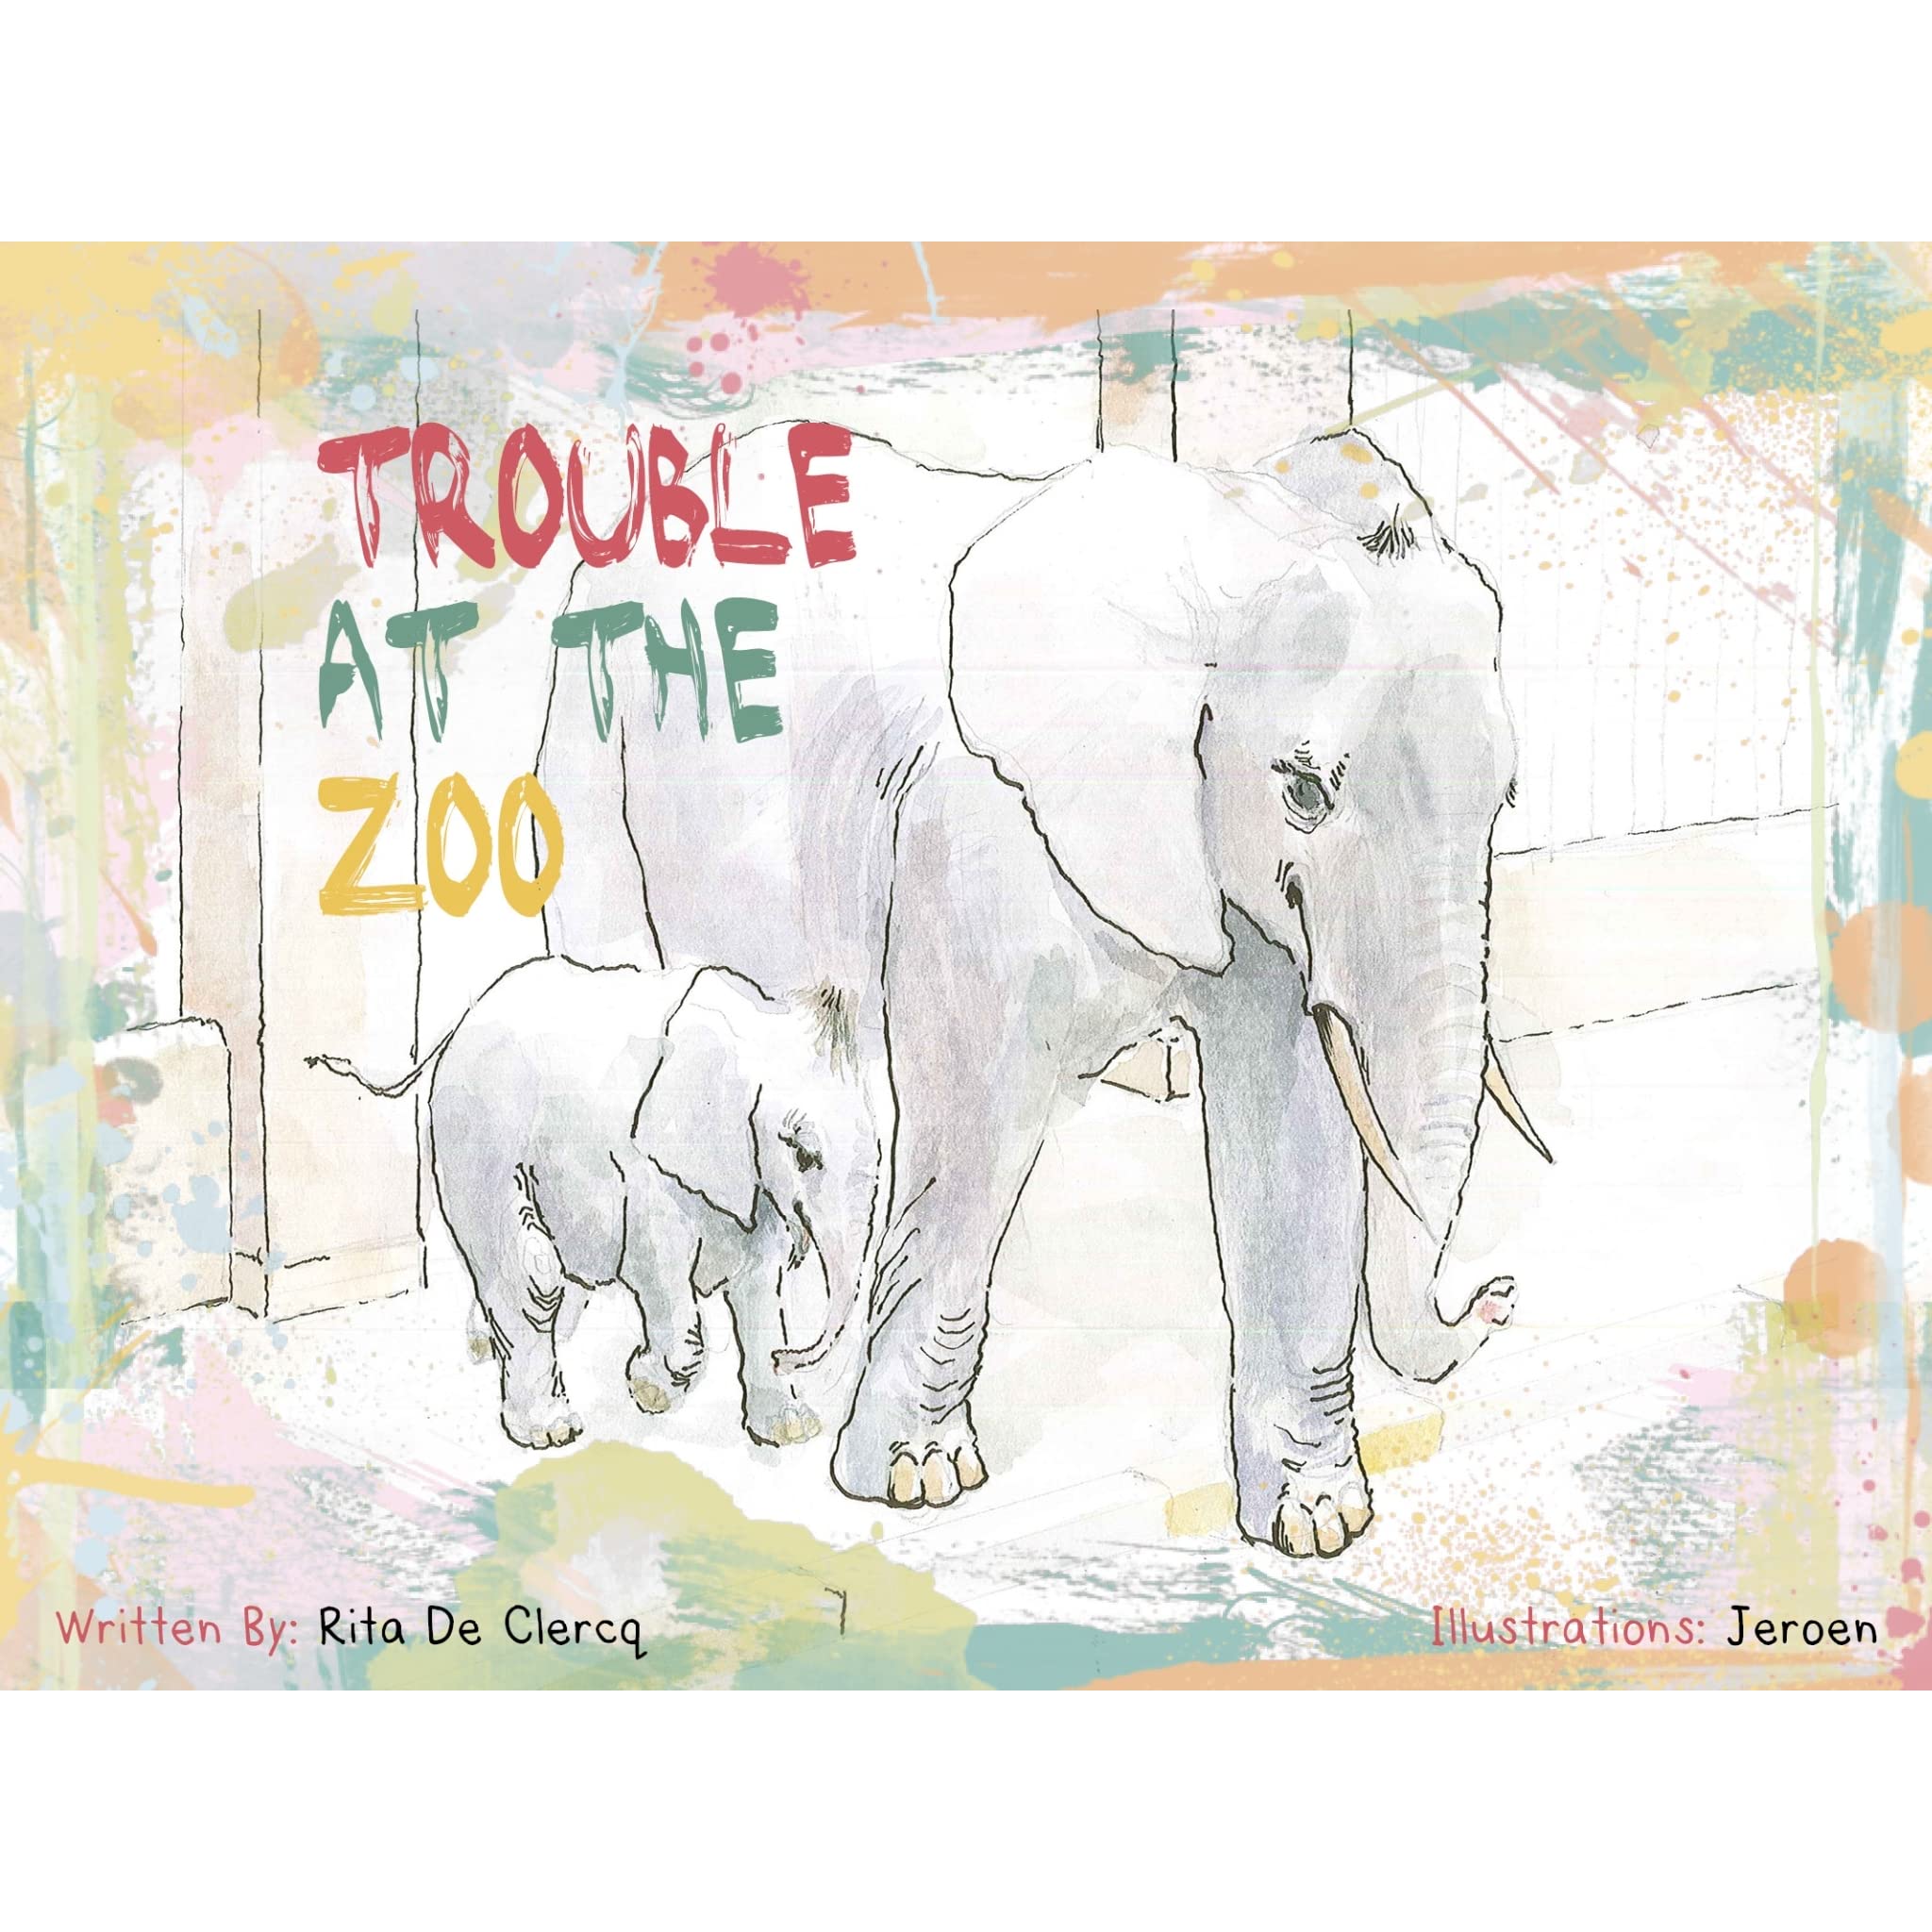 FREE: Trouble at the Zoo by Chris Stead